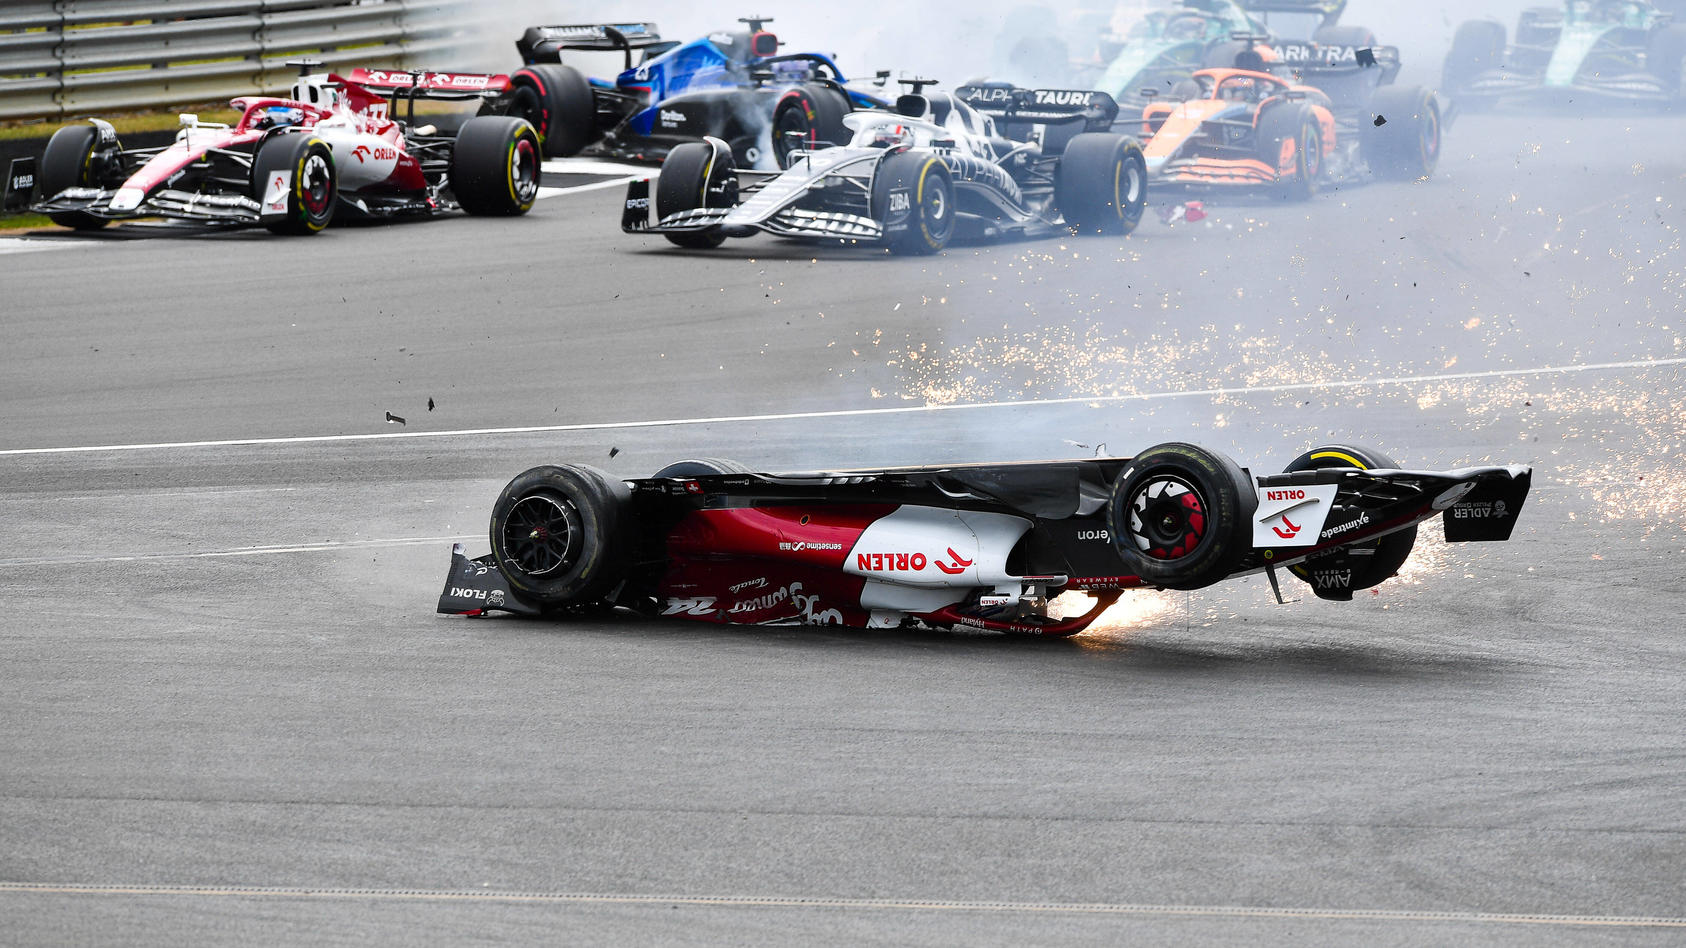 Sport Bilder des Tages 220704 -- LONDON, July 4, 2022 -- Alfa Romeo s Chinese driver Zhou Guanyu crashes out at the start of the Formula One British Grand Prix at the Silverstone motor racing, Motorsport circuit in Silverstone, Britain, on July 3, 20